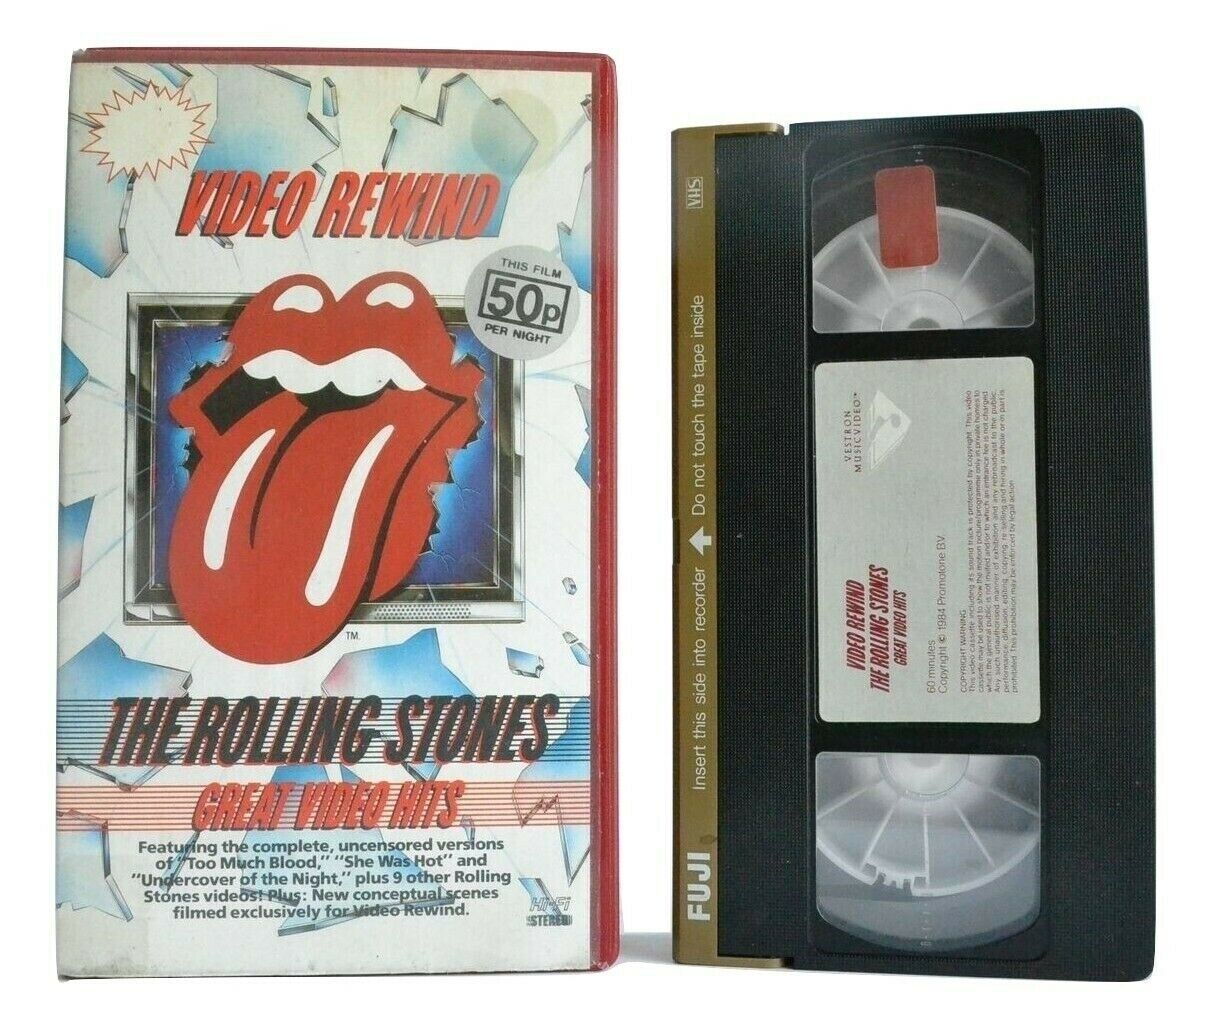 The Rolling Stones: Great Video Hits - Brown Sugar - Mick Jagger - Music -  VHS